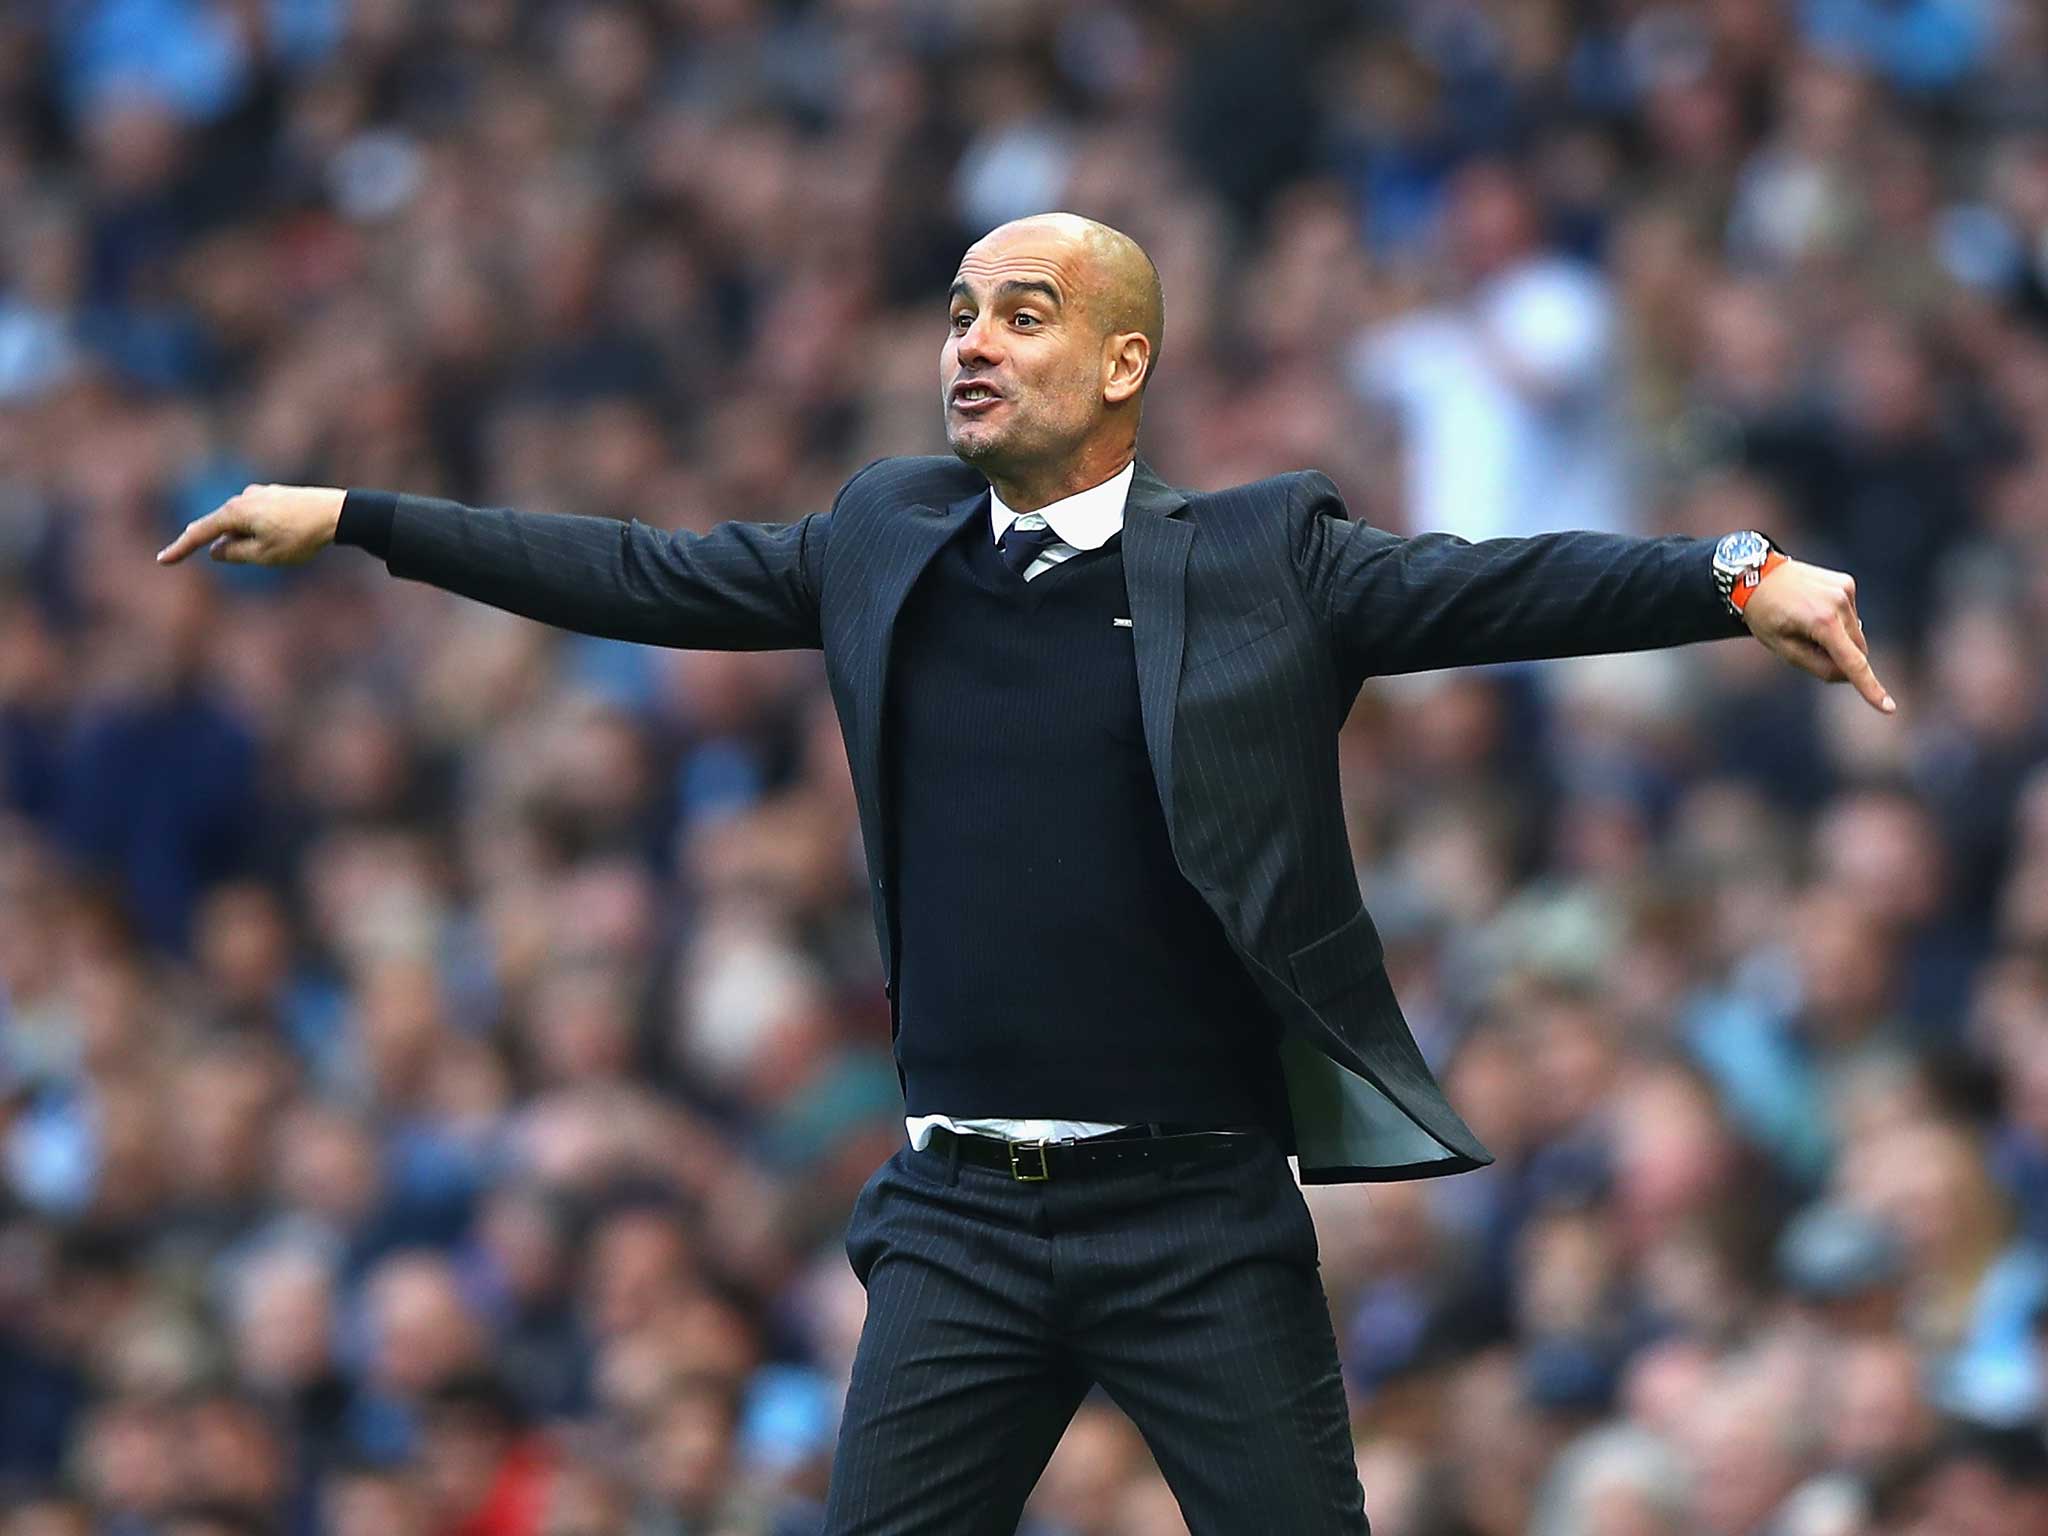 Pep Guardiola calls for more from his City side against Everton